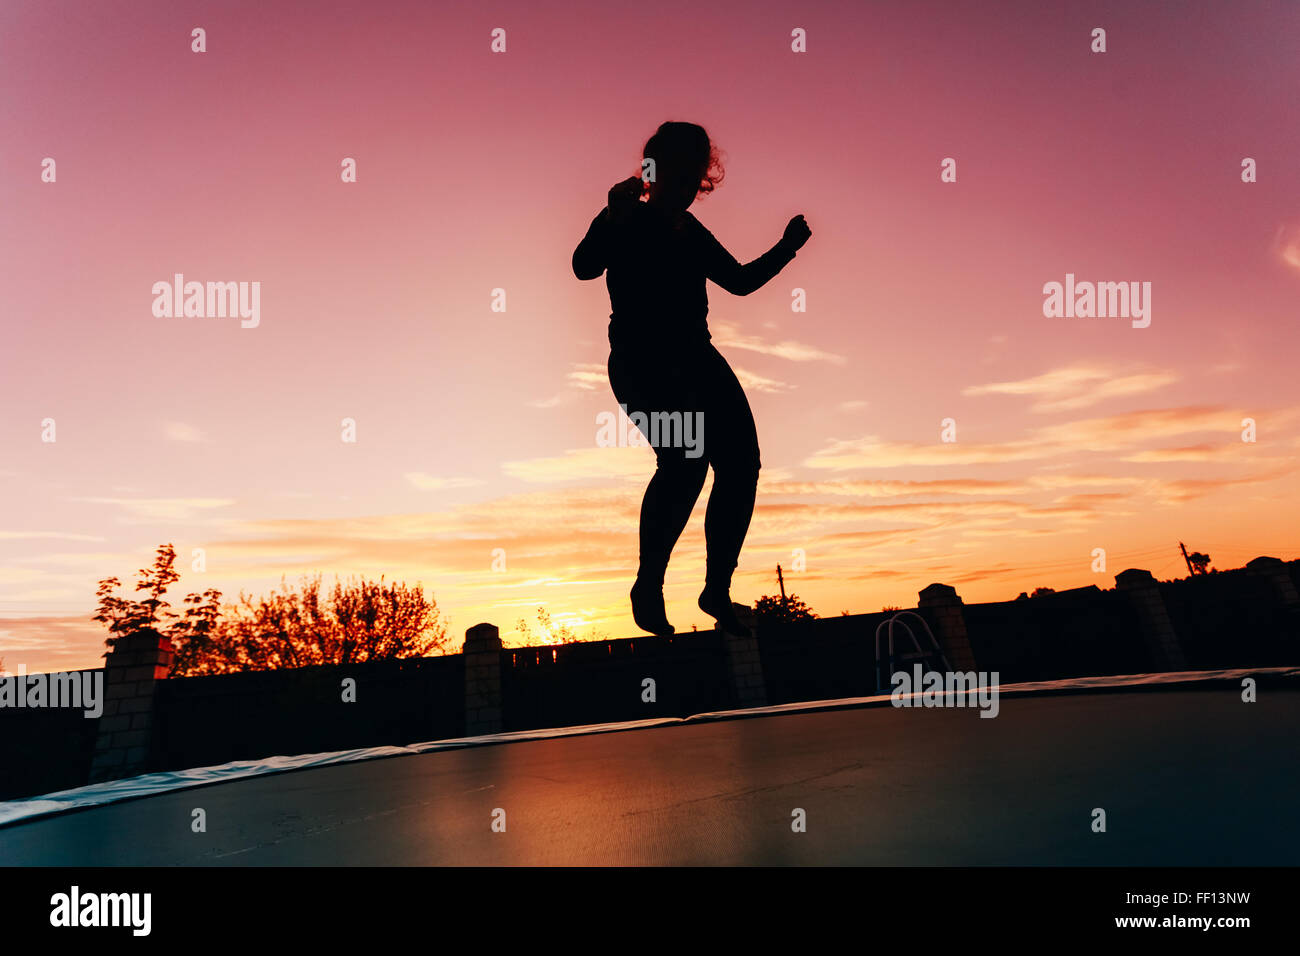 Silhouette Of Beautiful Plus Size Young Woman Girl Jumping On Trampoline On Evening Red, Pink Colorful Sunset Sky Background Stock Photo